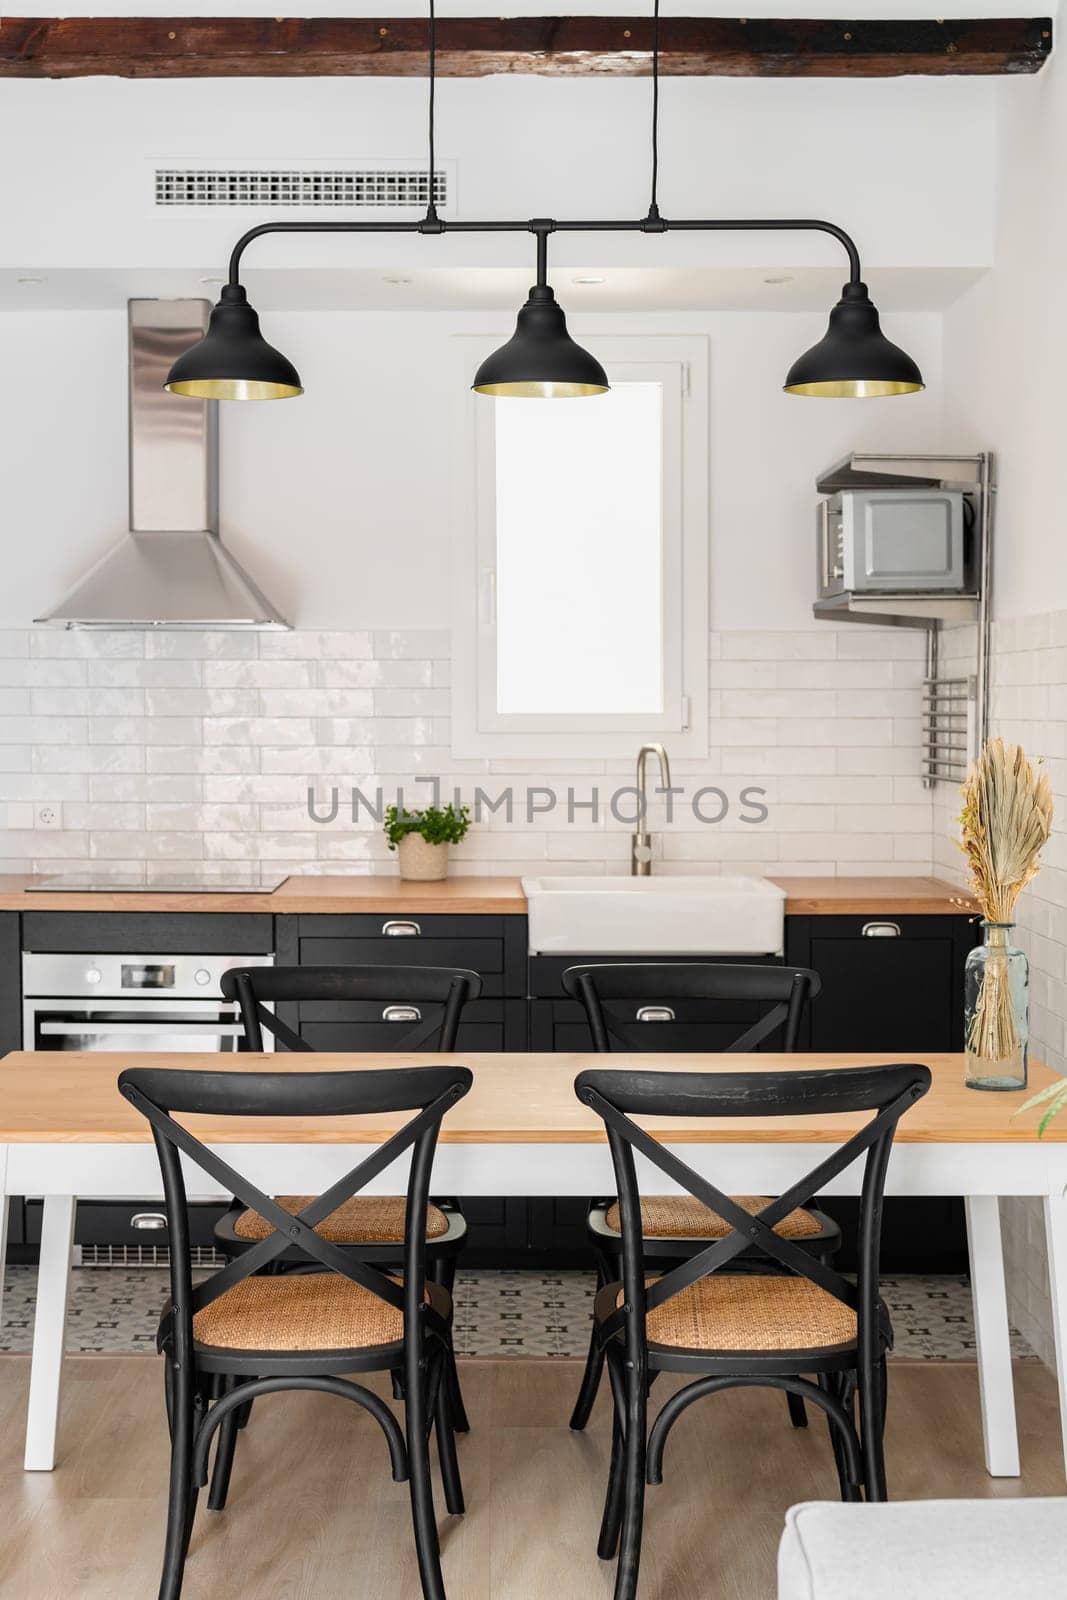 Furnished kitchen area with appliances and furniture by apavlin